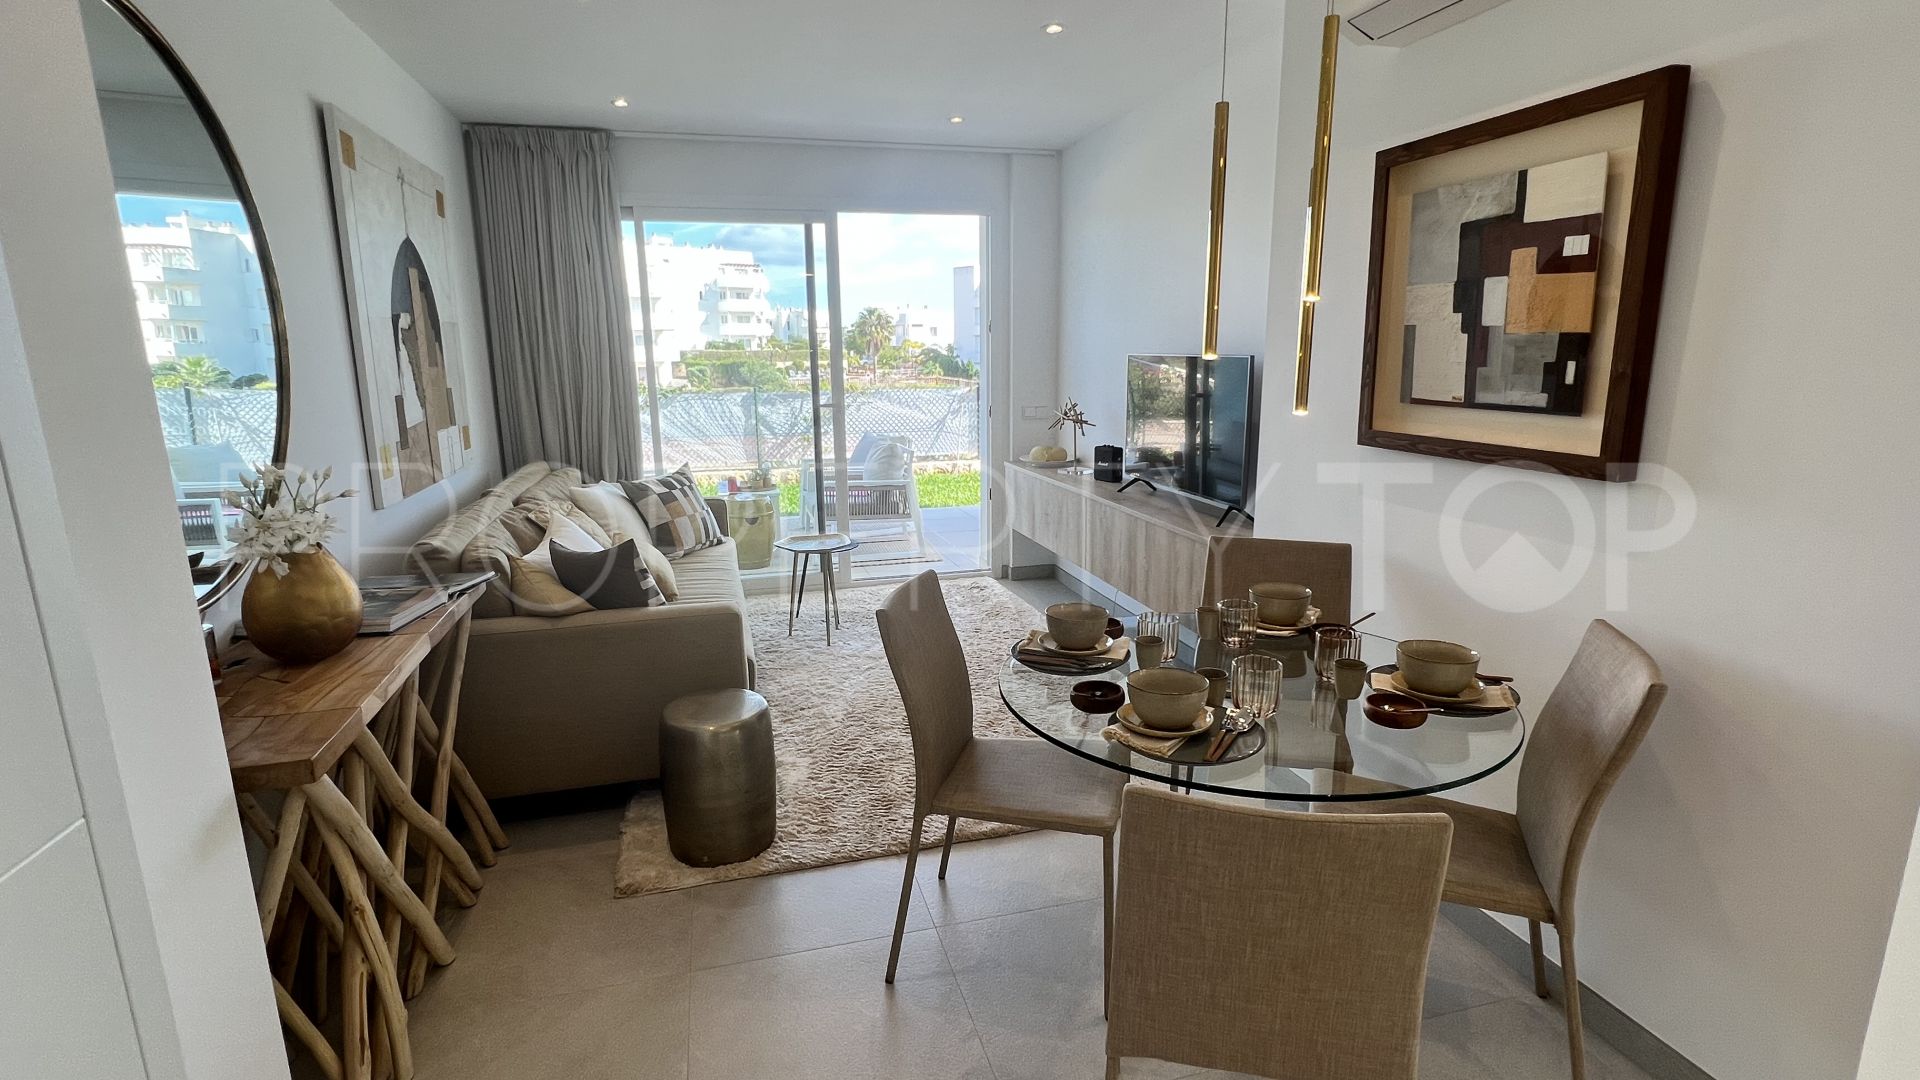 Apartment for sale in Cala de Or with 2 bedrooms